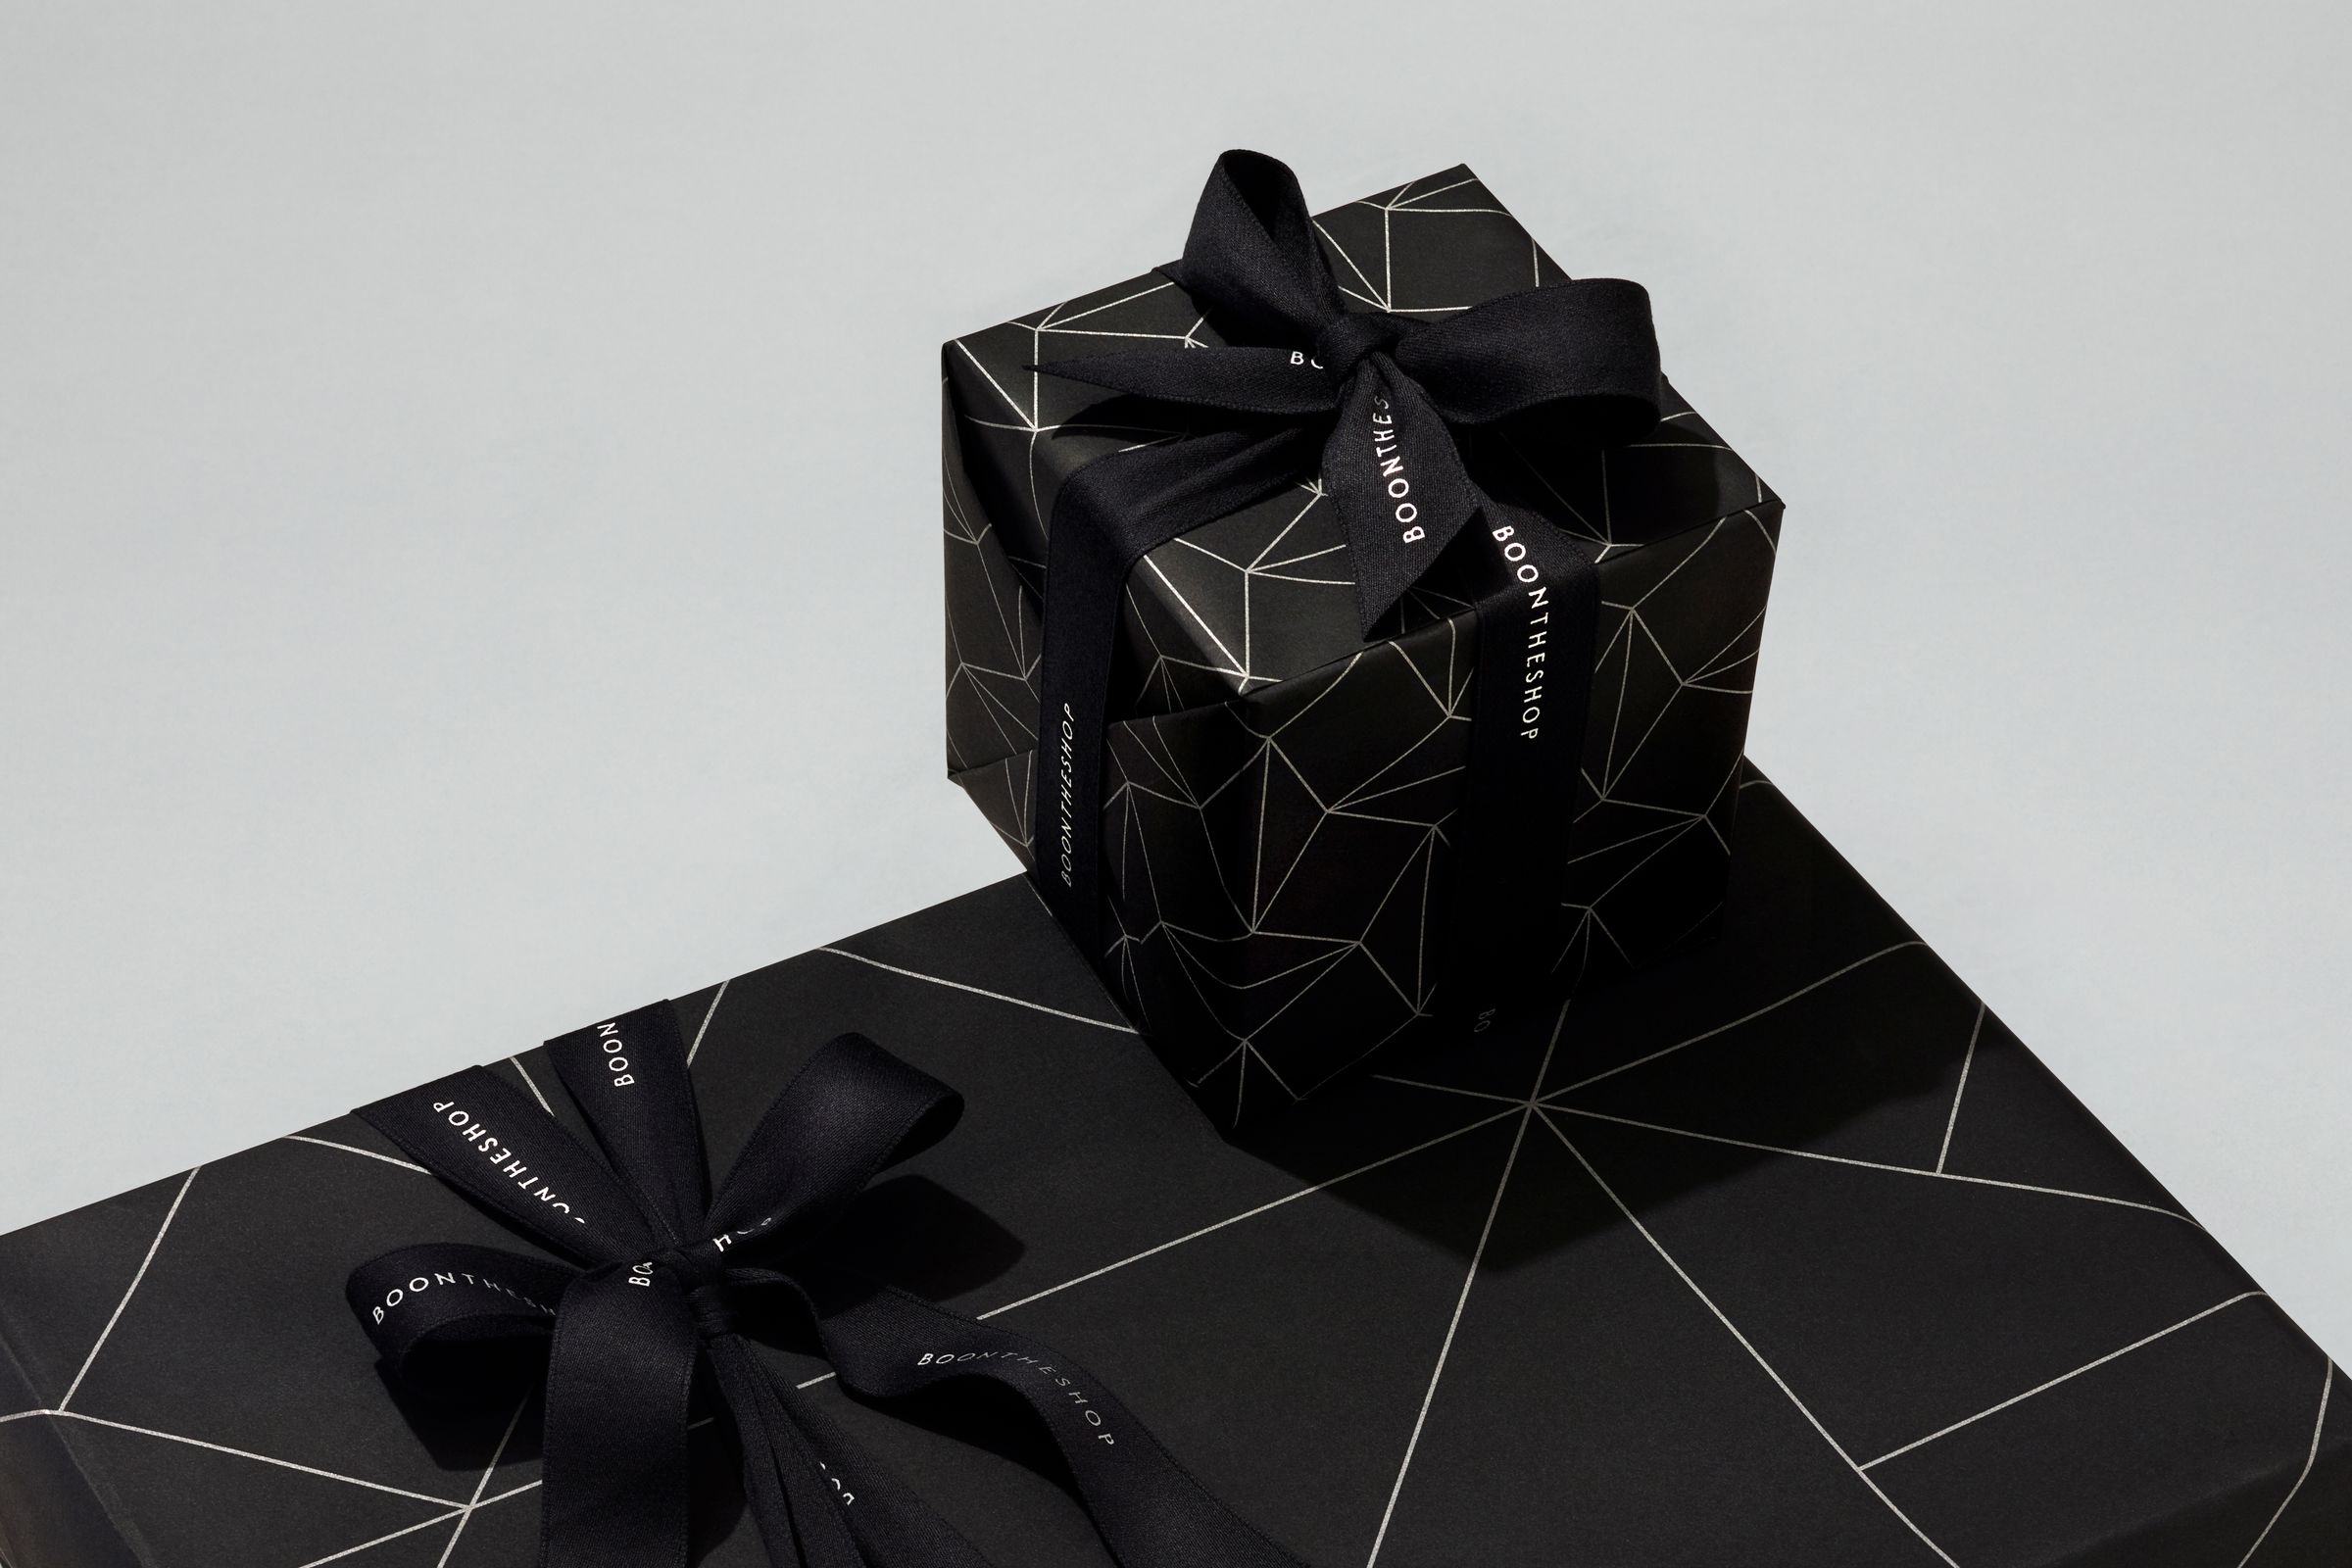 BOONTHESHOP gift packaging design